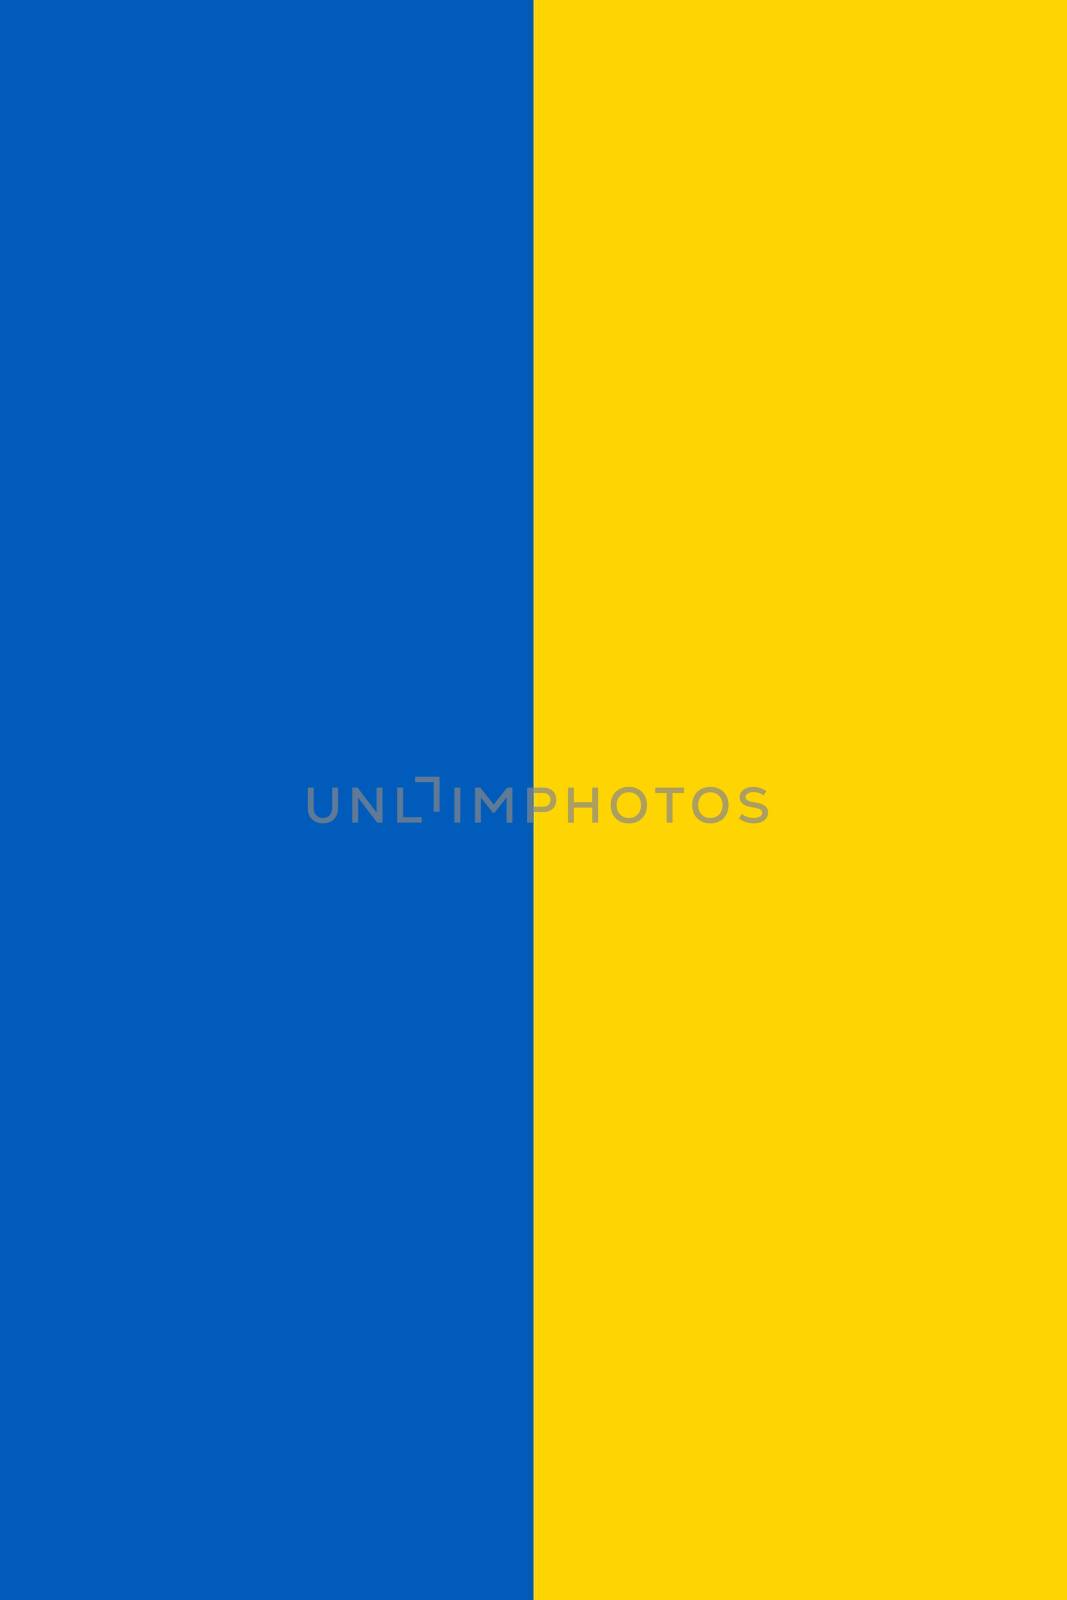 Vertical Ukraine flag. Official state symbol of country. Official RGB colors.